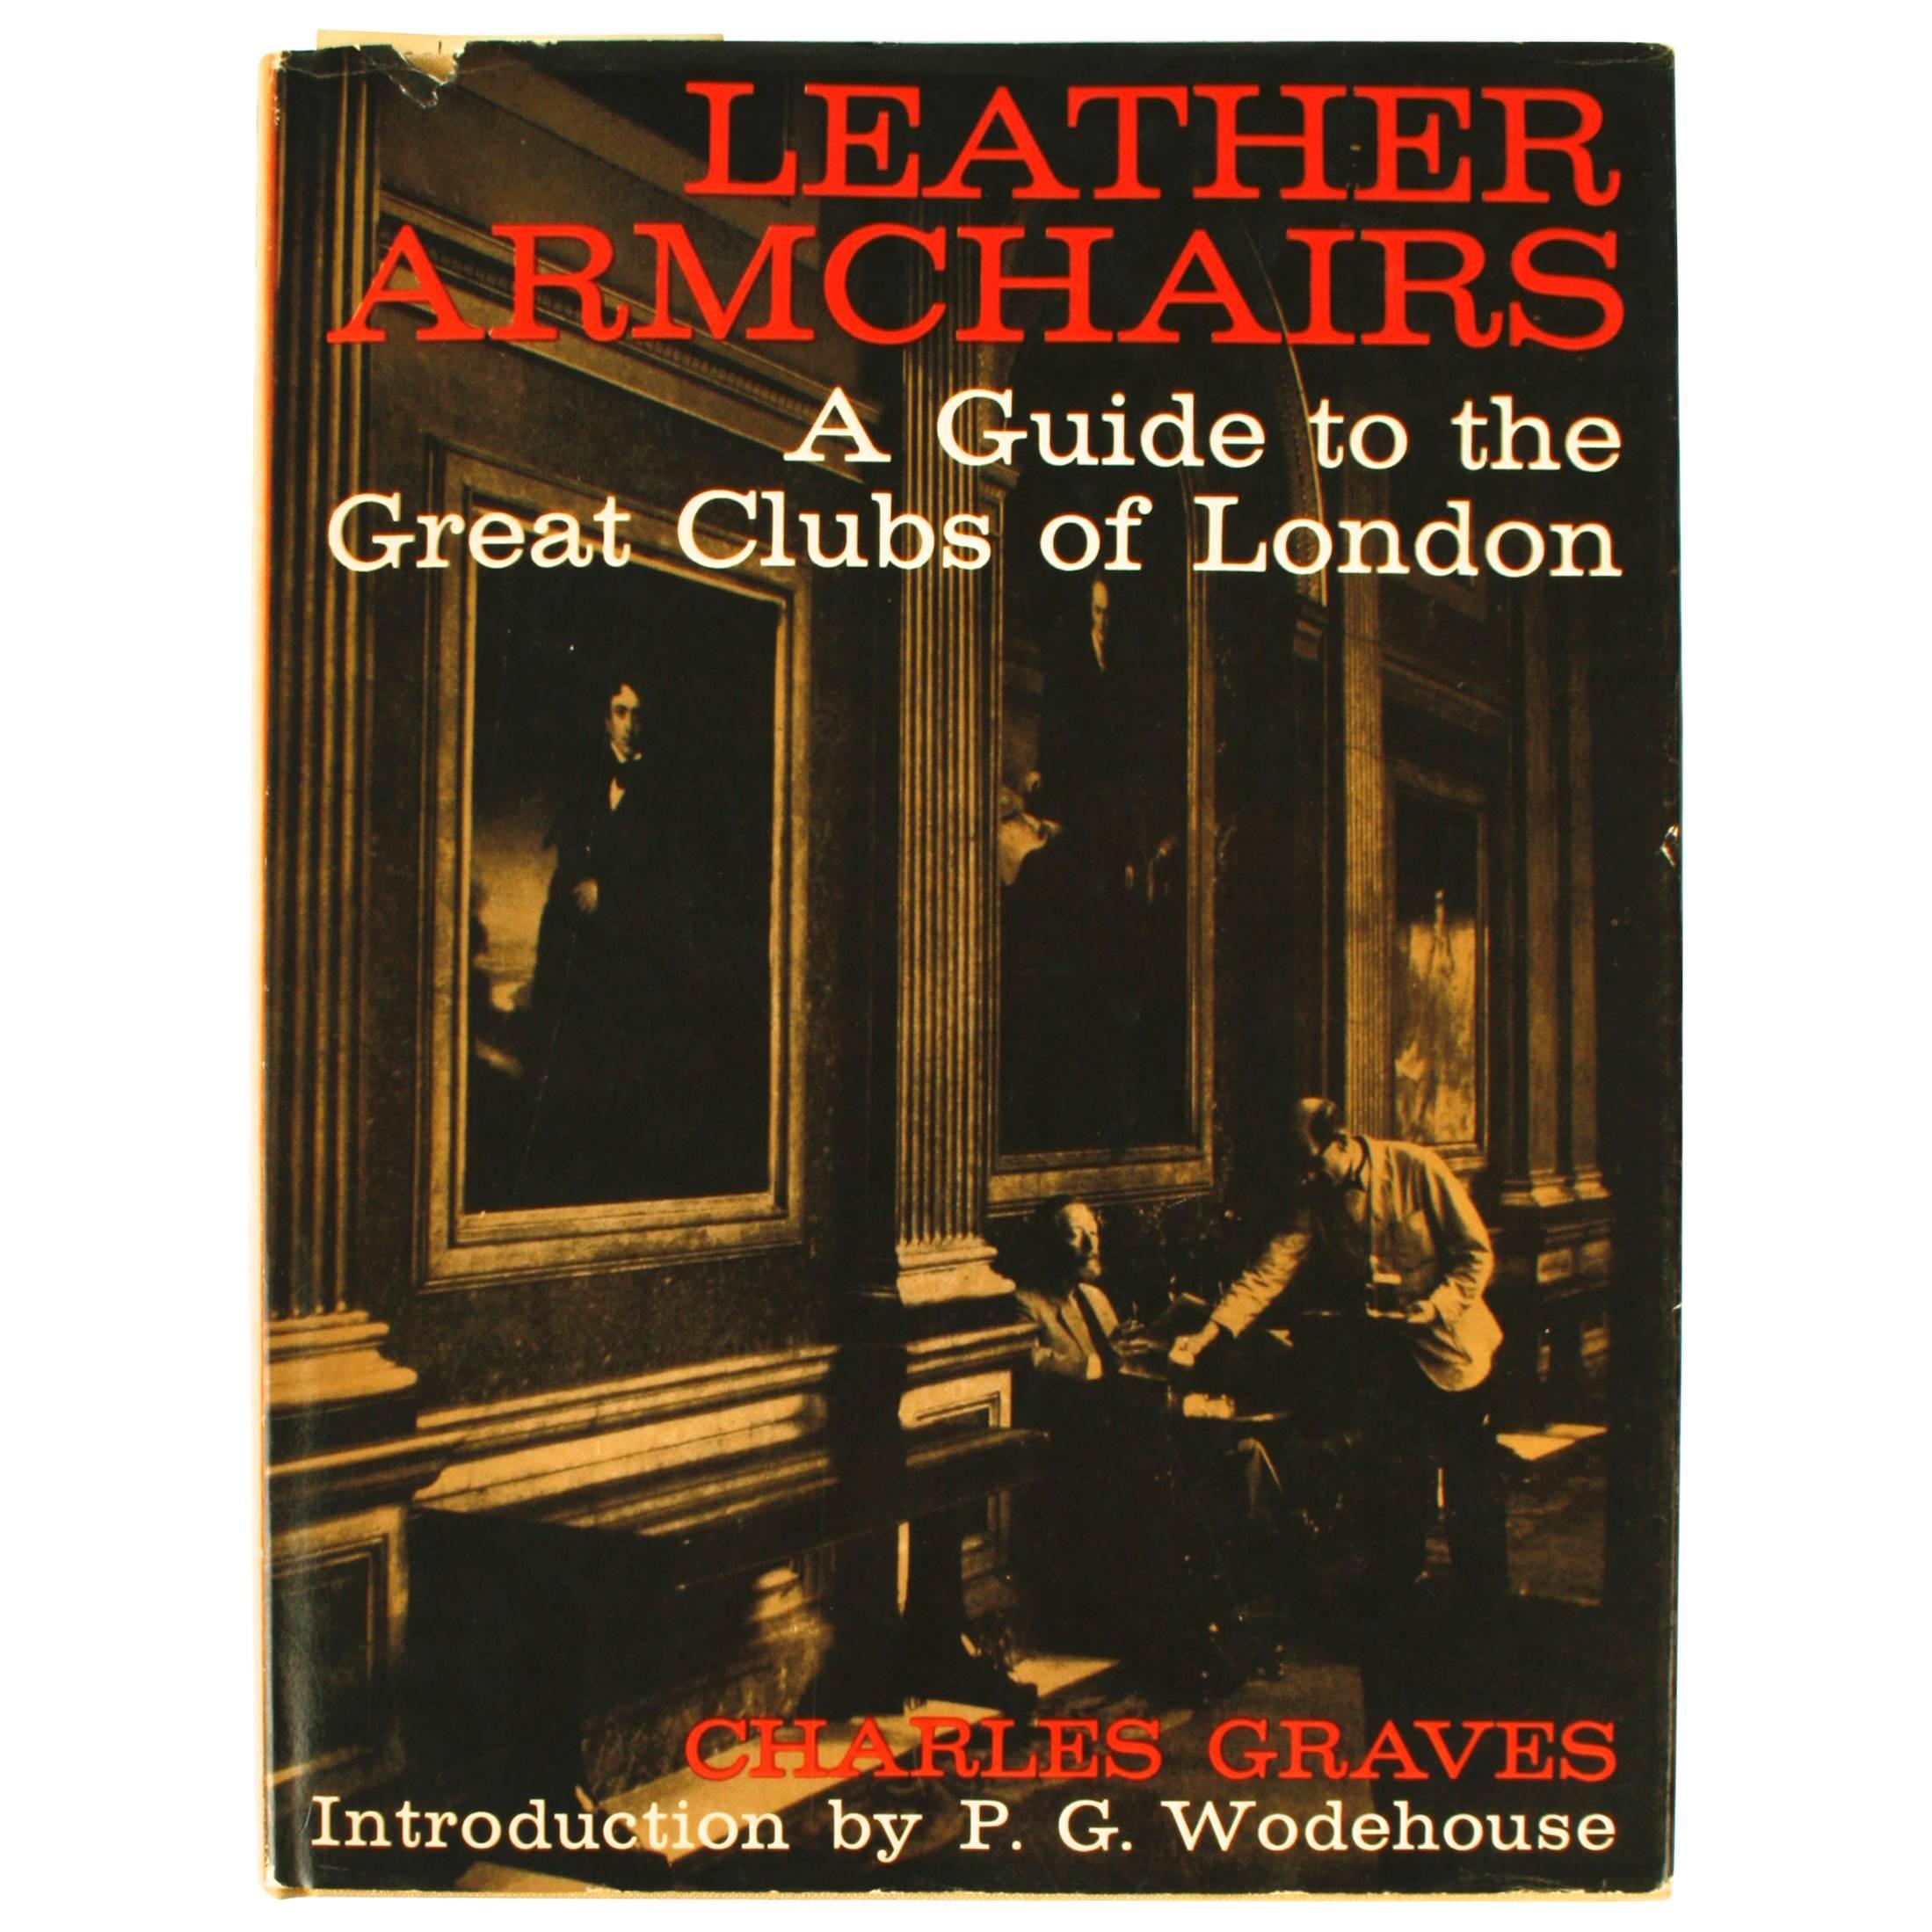 Leather Armchairs, a Guide to the Great Clubs of London by Charles Graves